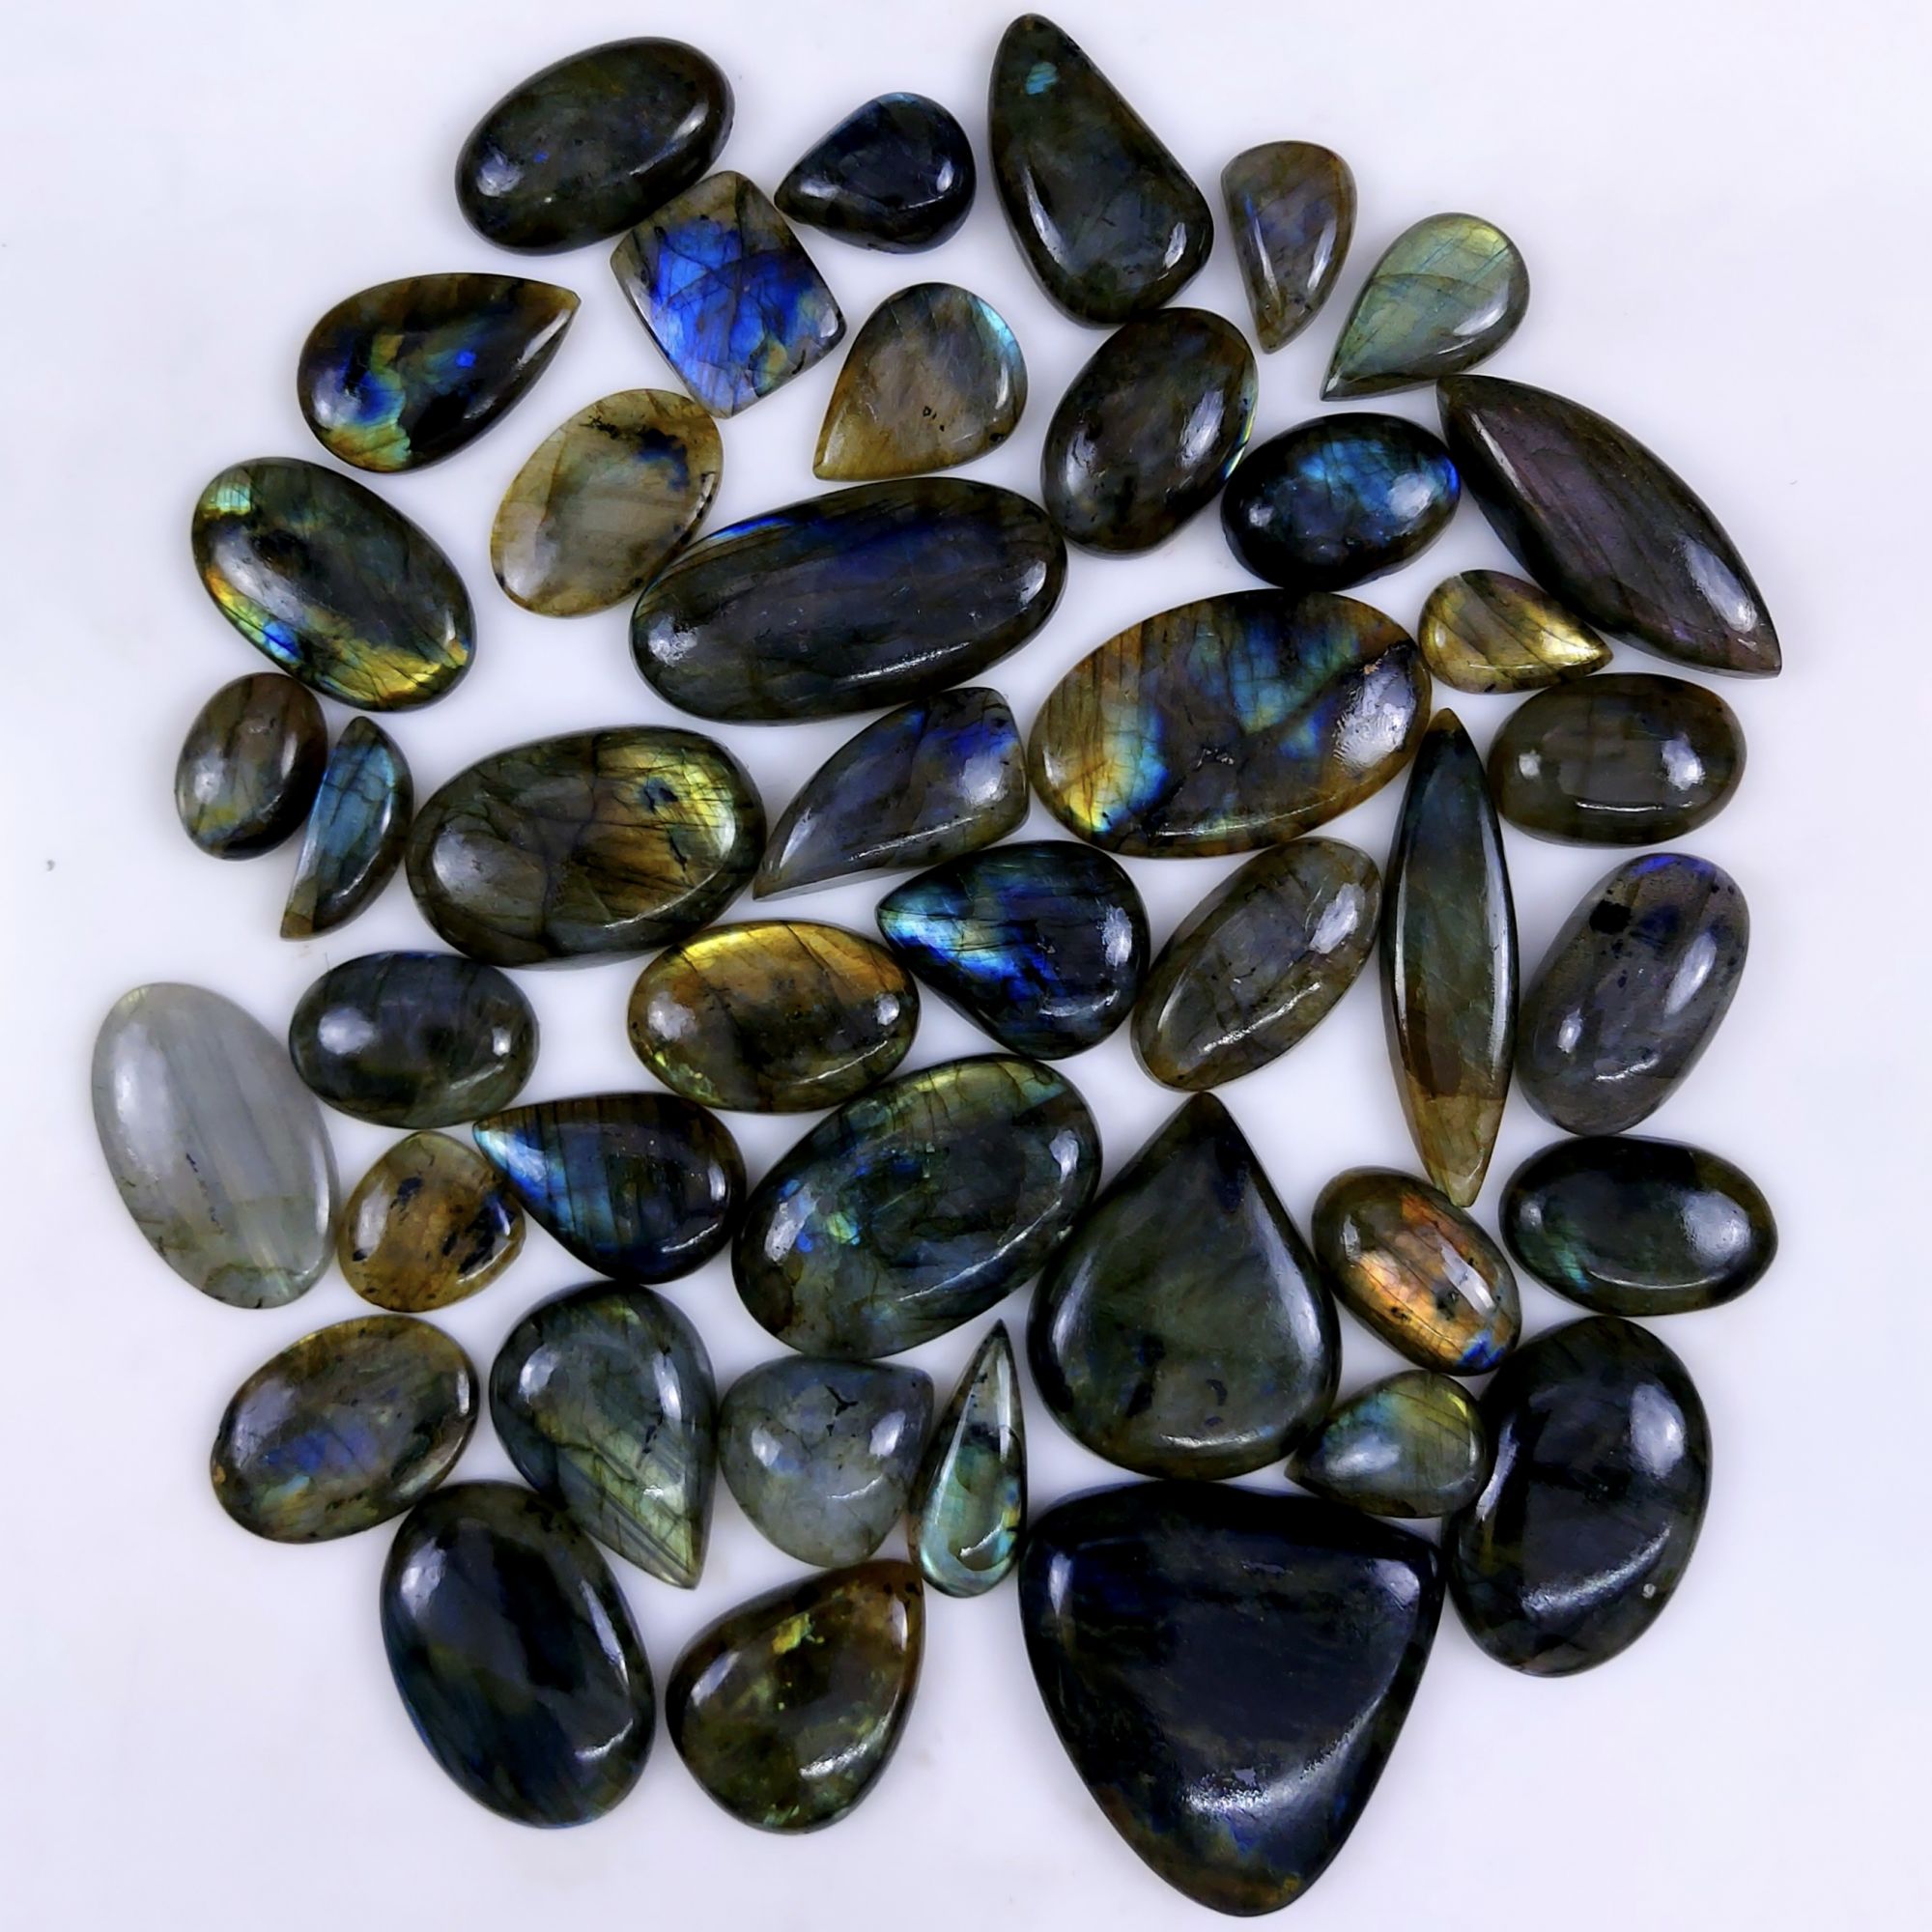 43pc 1613Cts Labradorite Cabochon Multifire Healing Crystal For Jewelry Supplies, Labradorite Necklace Handmade Wire Wrapped Gemstone Pendant 46x44 18x13mm#6340